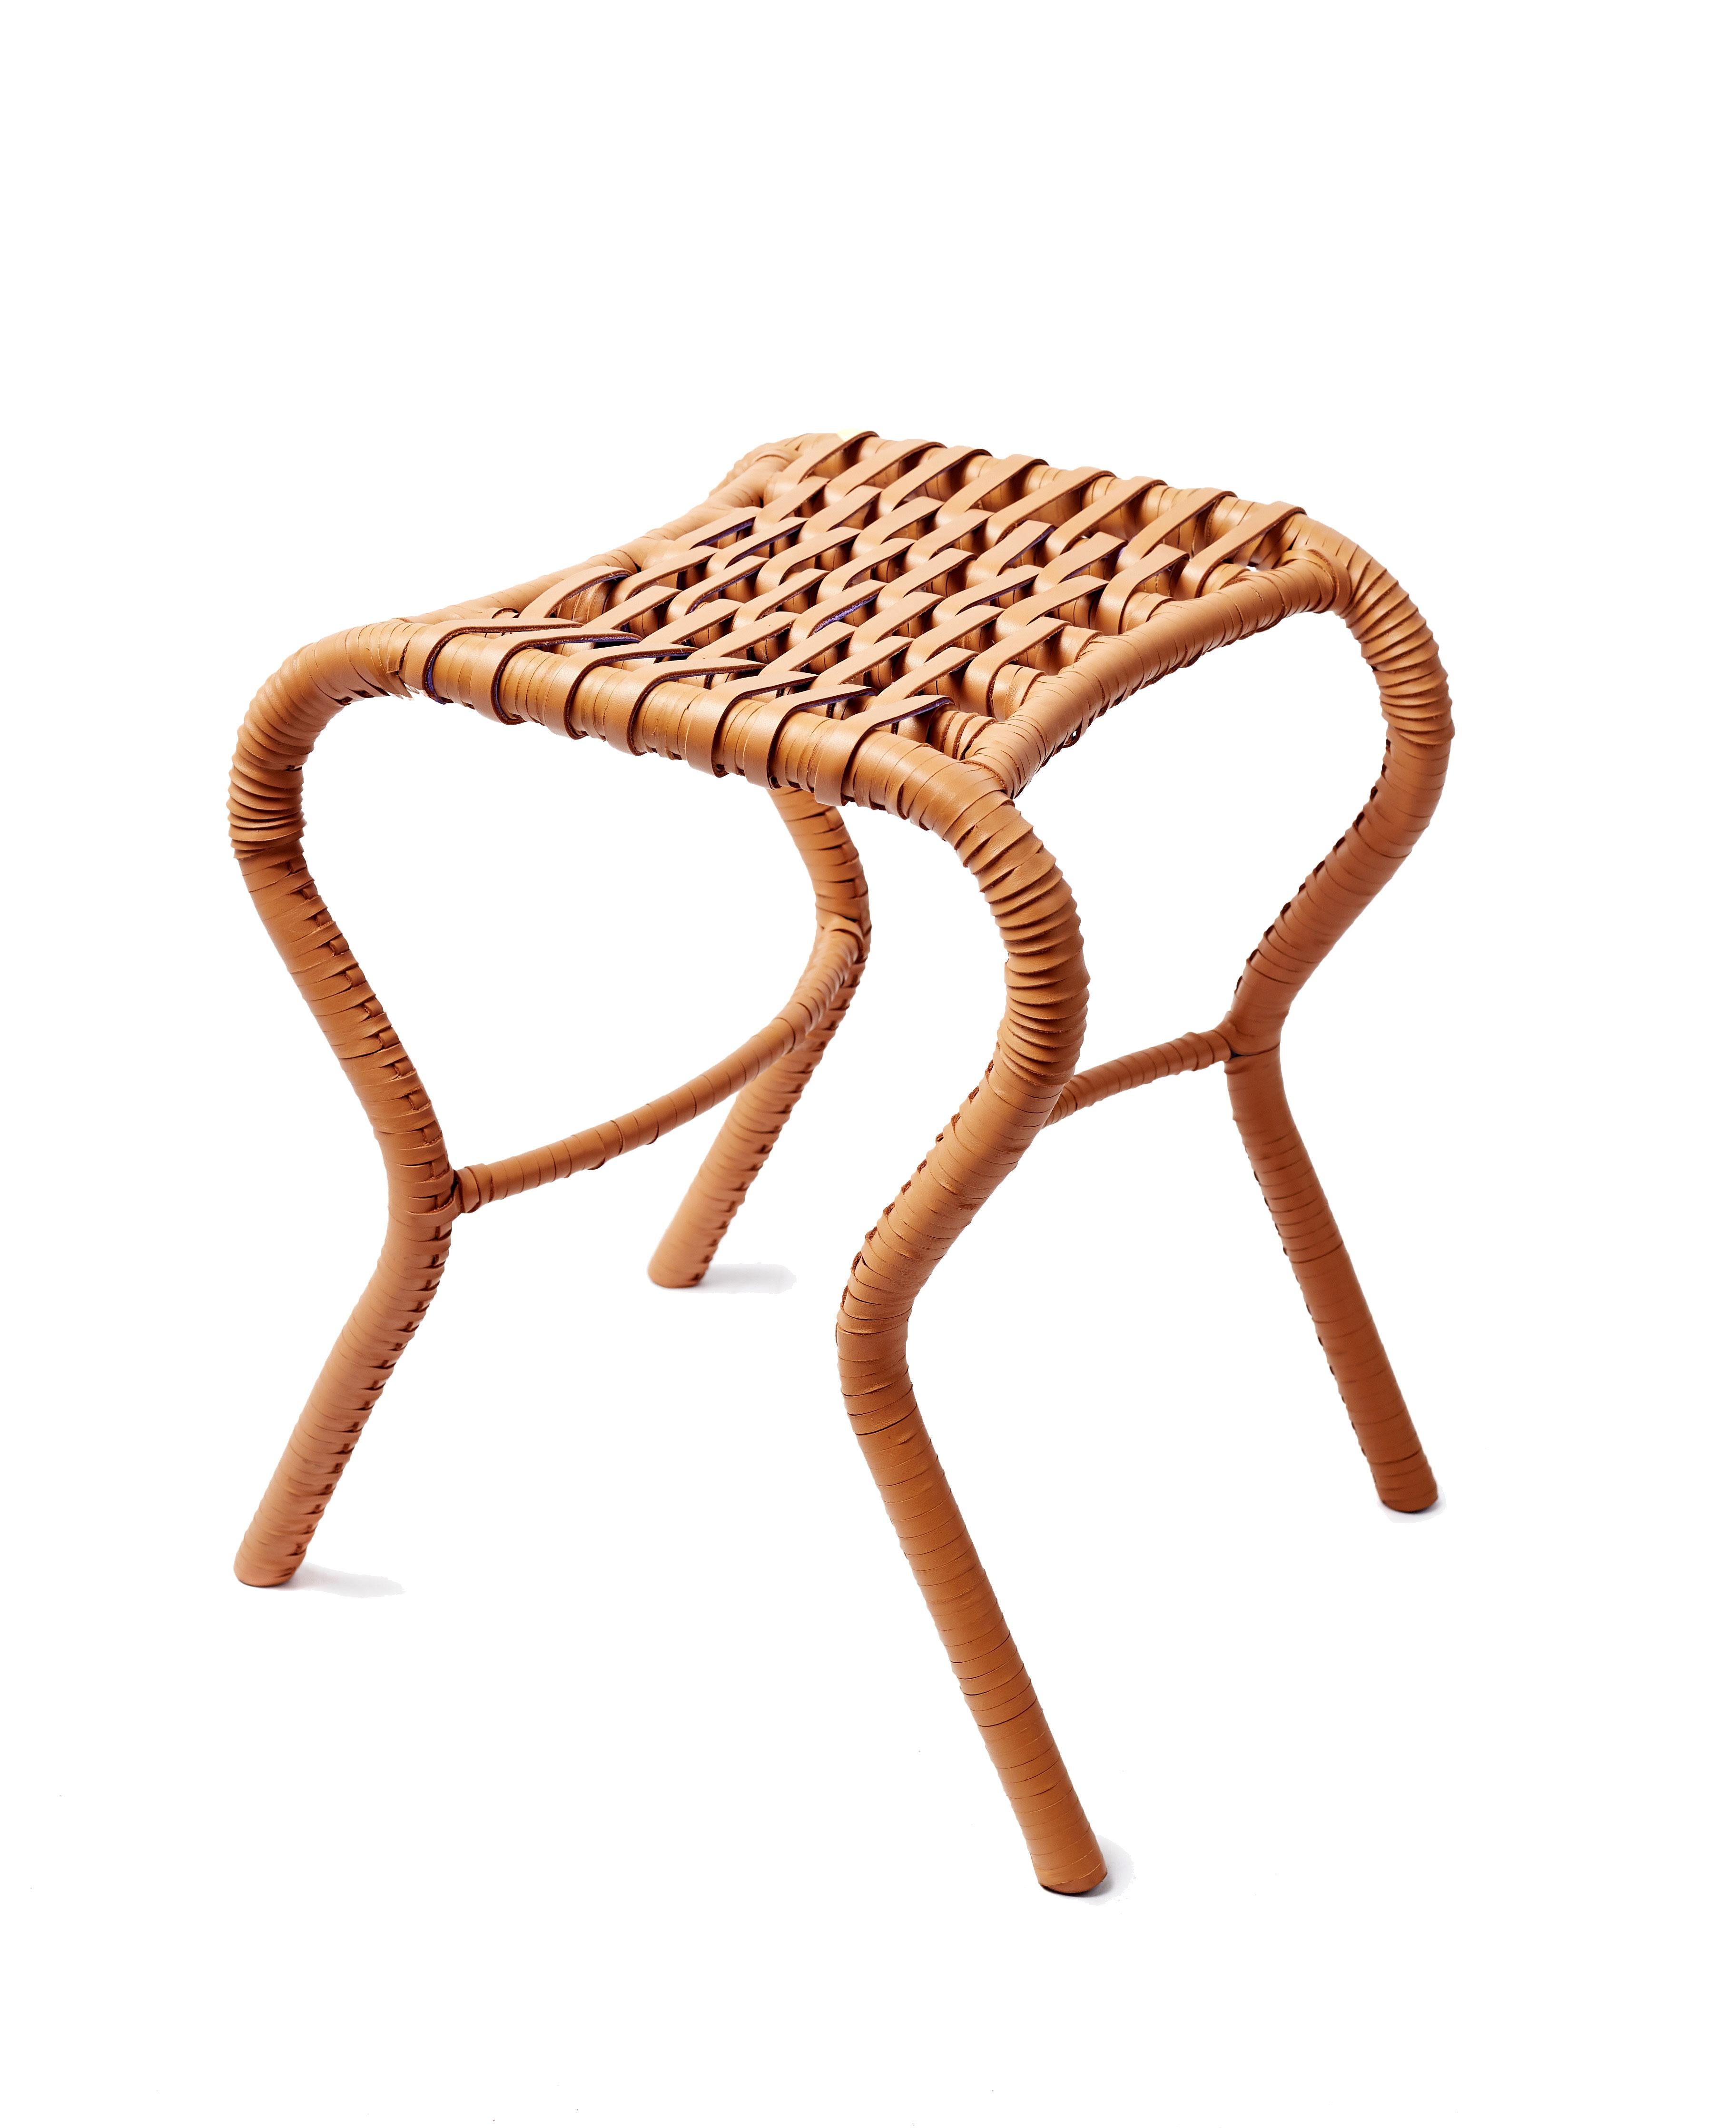 International Style 21st century Woven Leather Bata Stool For Sale